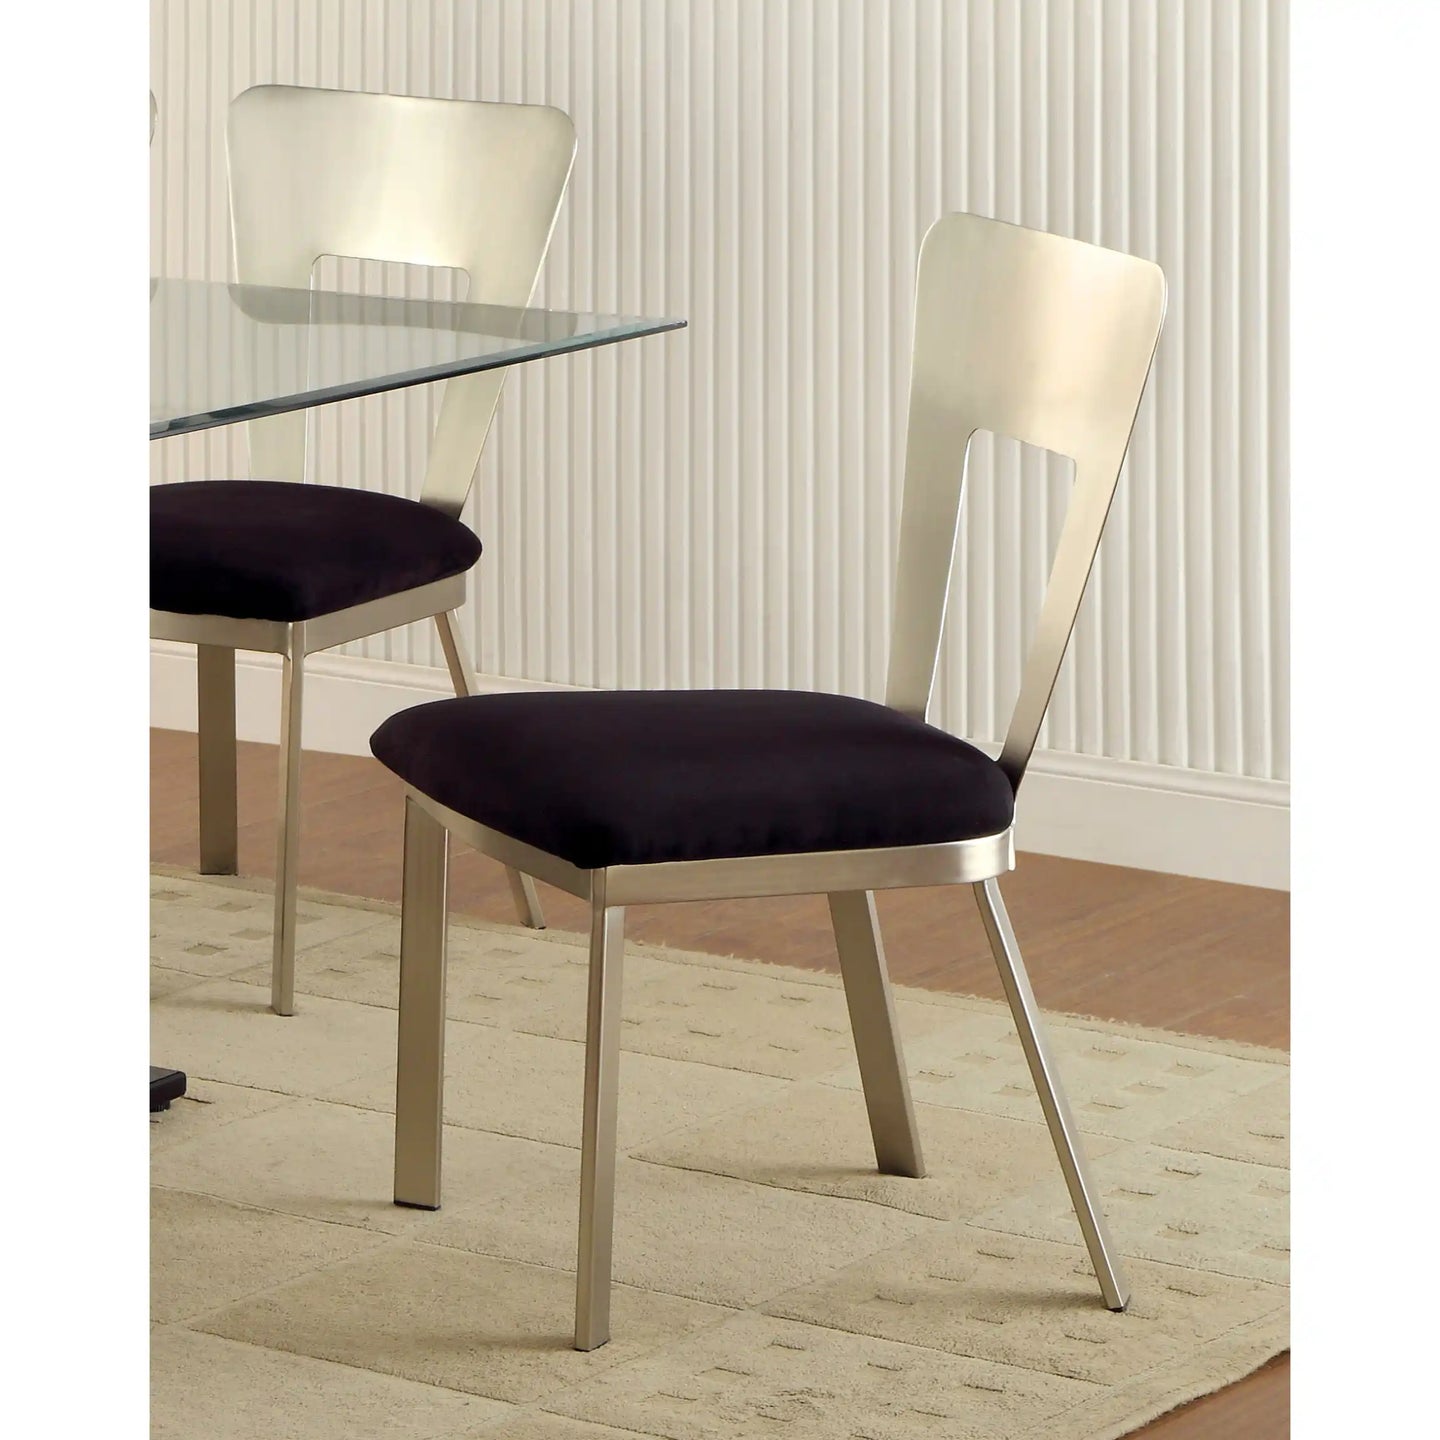 Furniture of America Tino Contemporary Padded Side Chairs (Set of 2) - IDF-3728SC